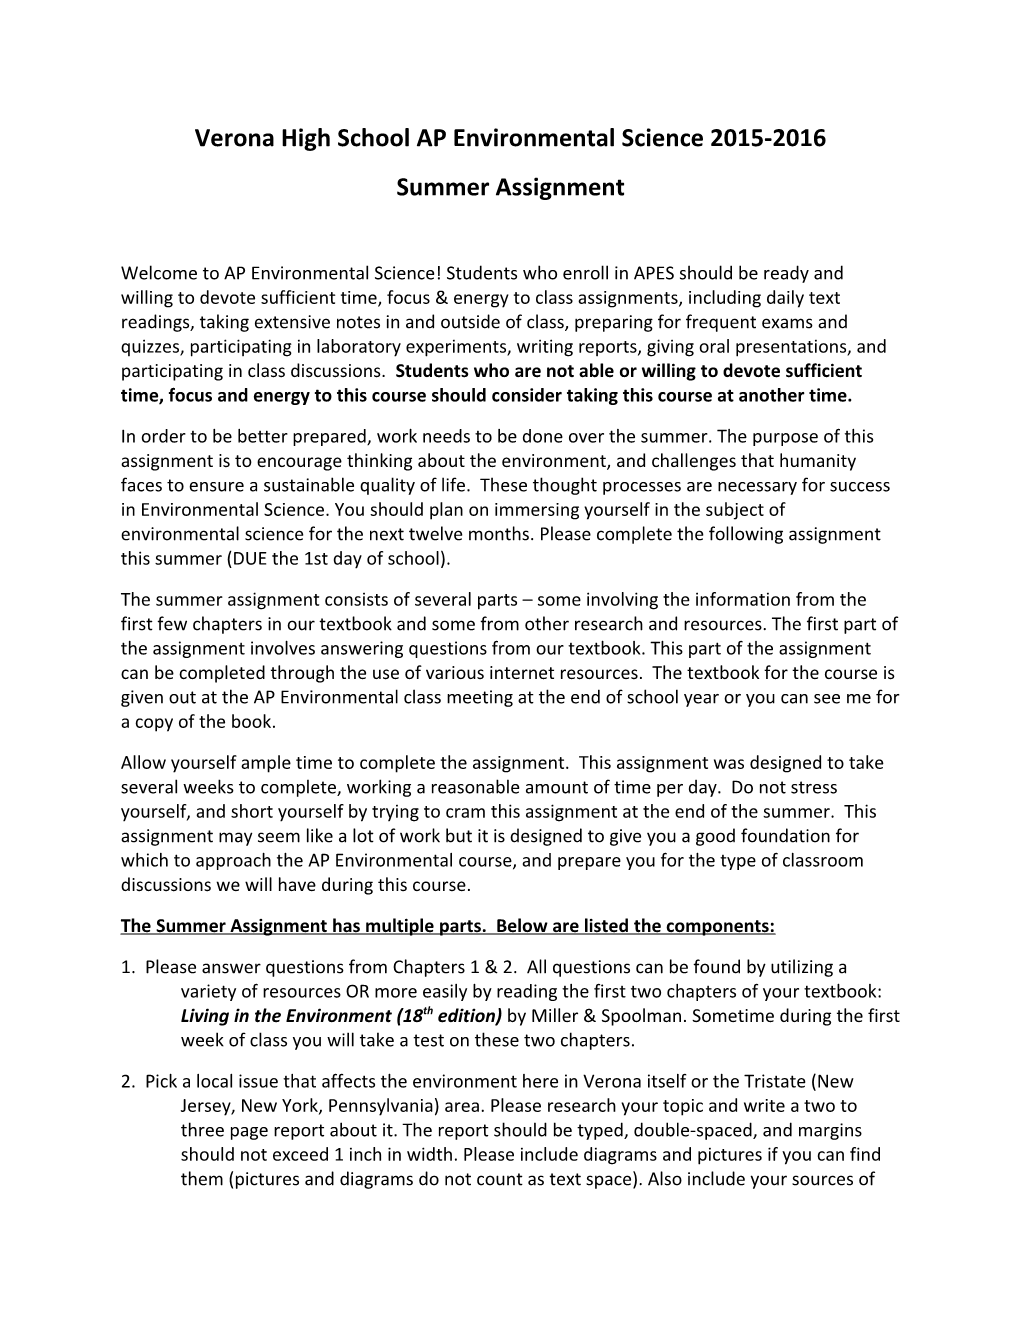 AP Environmental Science Summer Assignment Package (Draft)